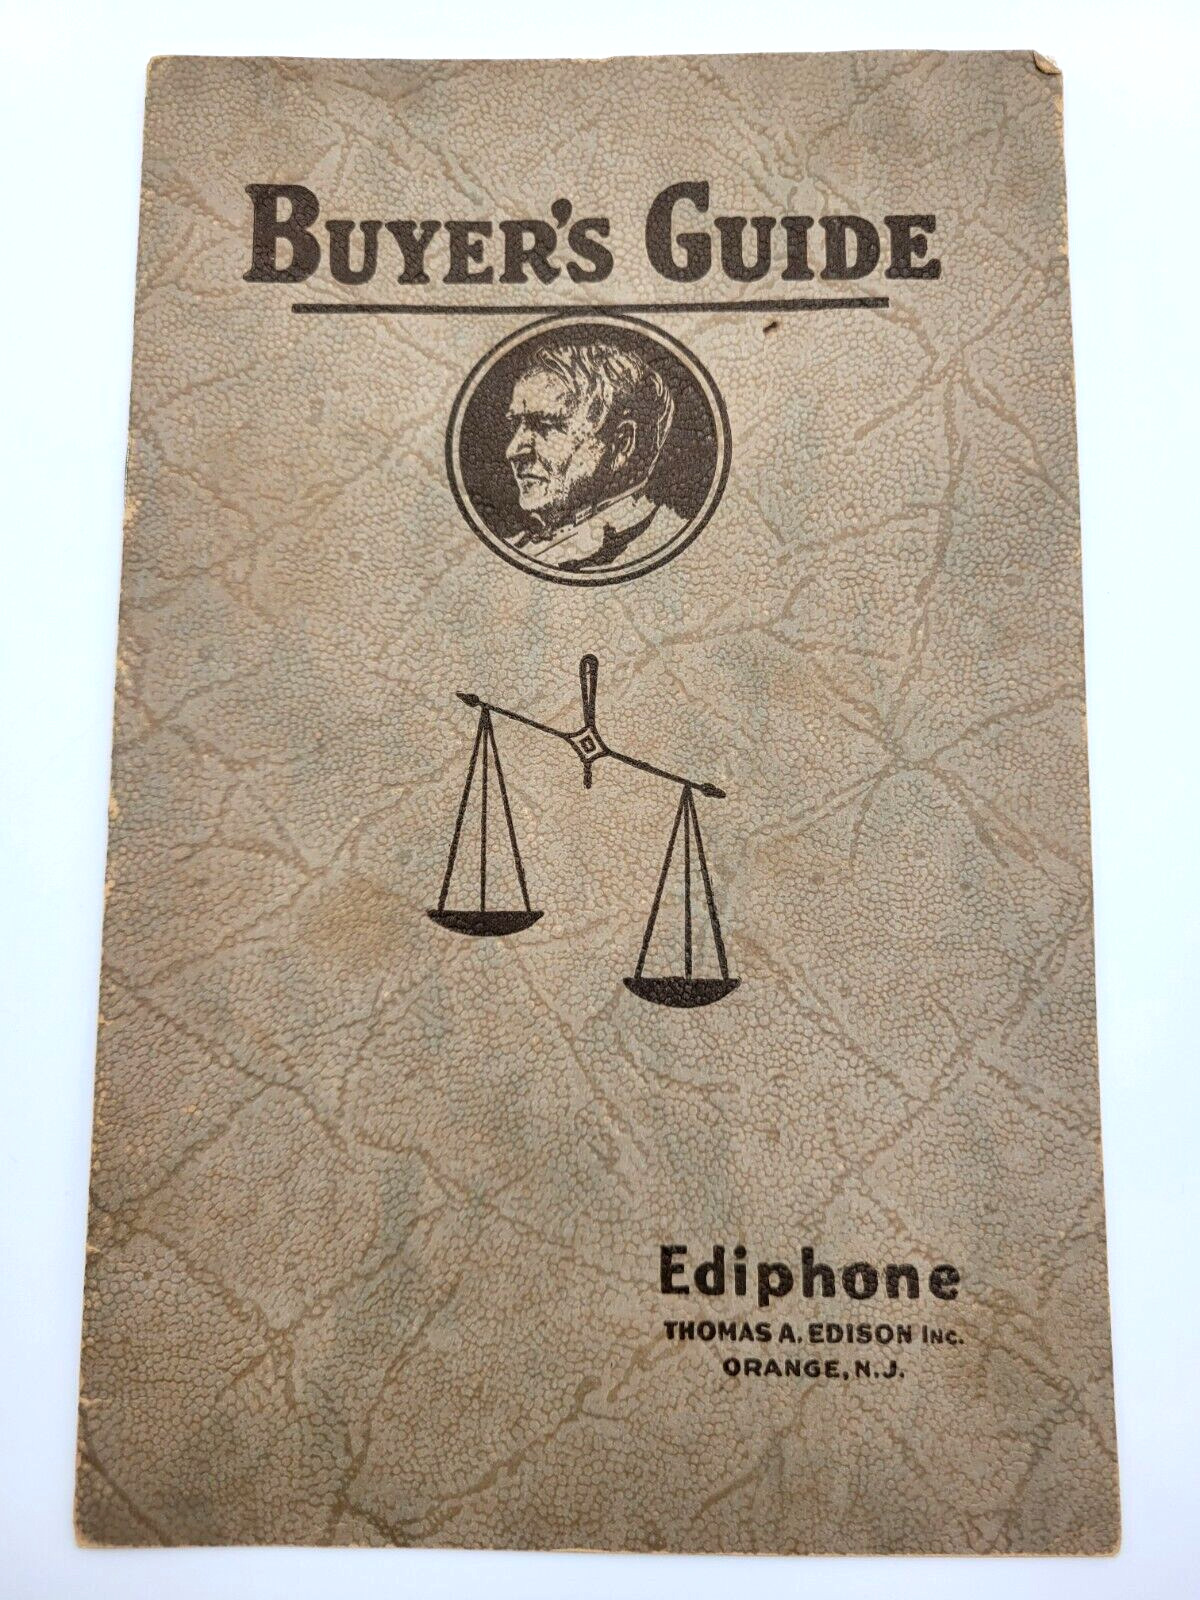 Vintage 1928 Edison Ediphone Buyer's Guide Catalog Book Director's Cabinet